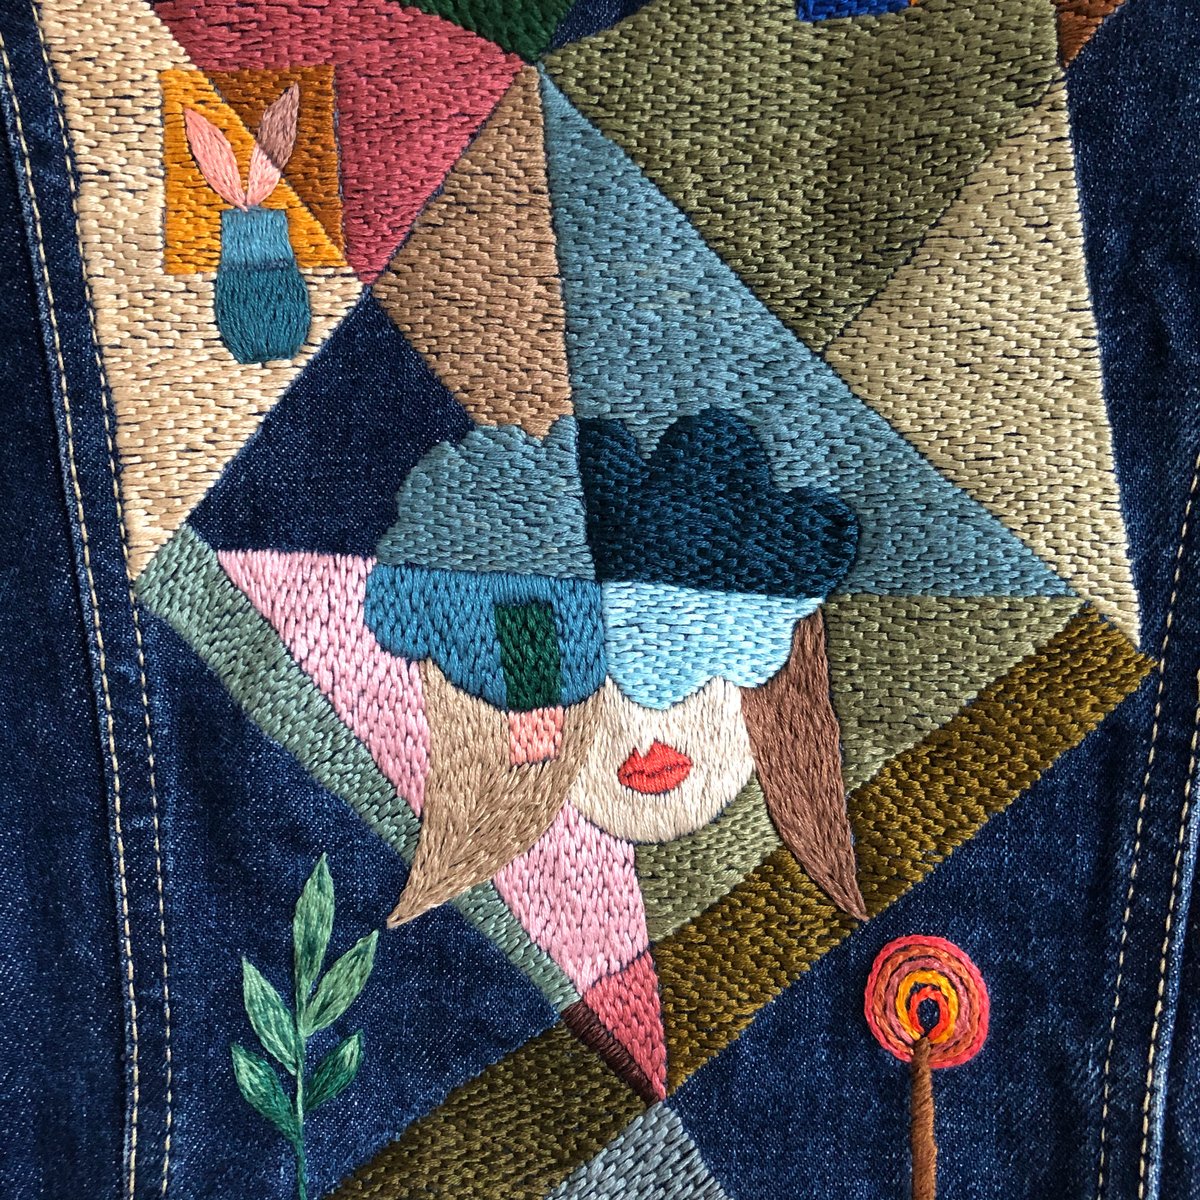 We break too easily, 100+ hours of hand embroidery on a vintage denim  jacket, one of a kind